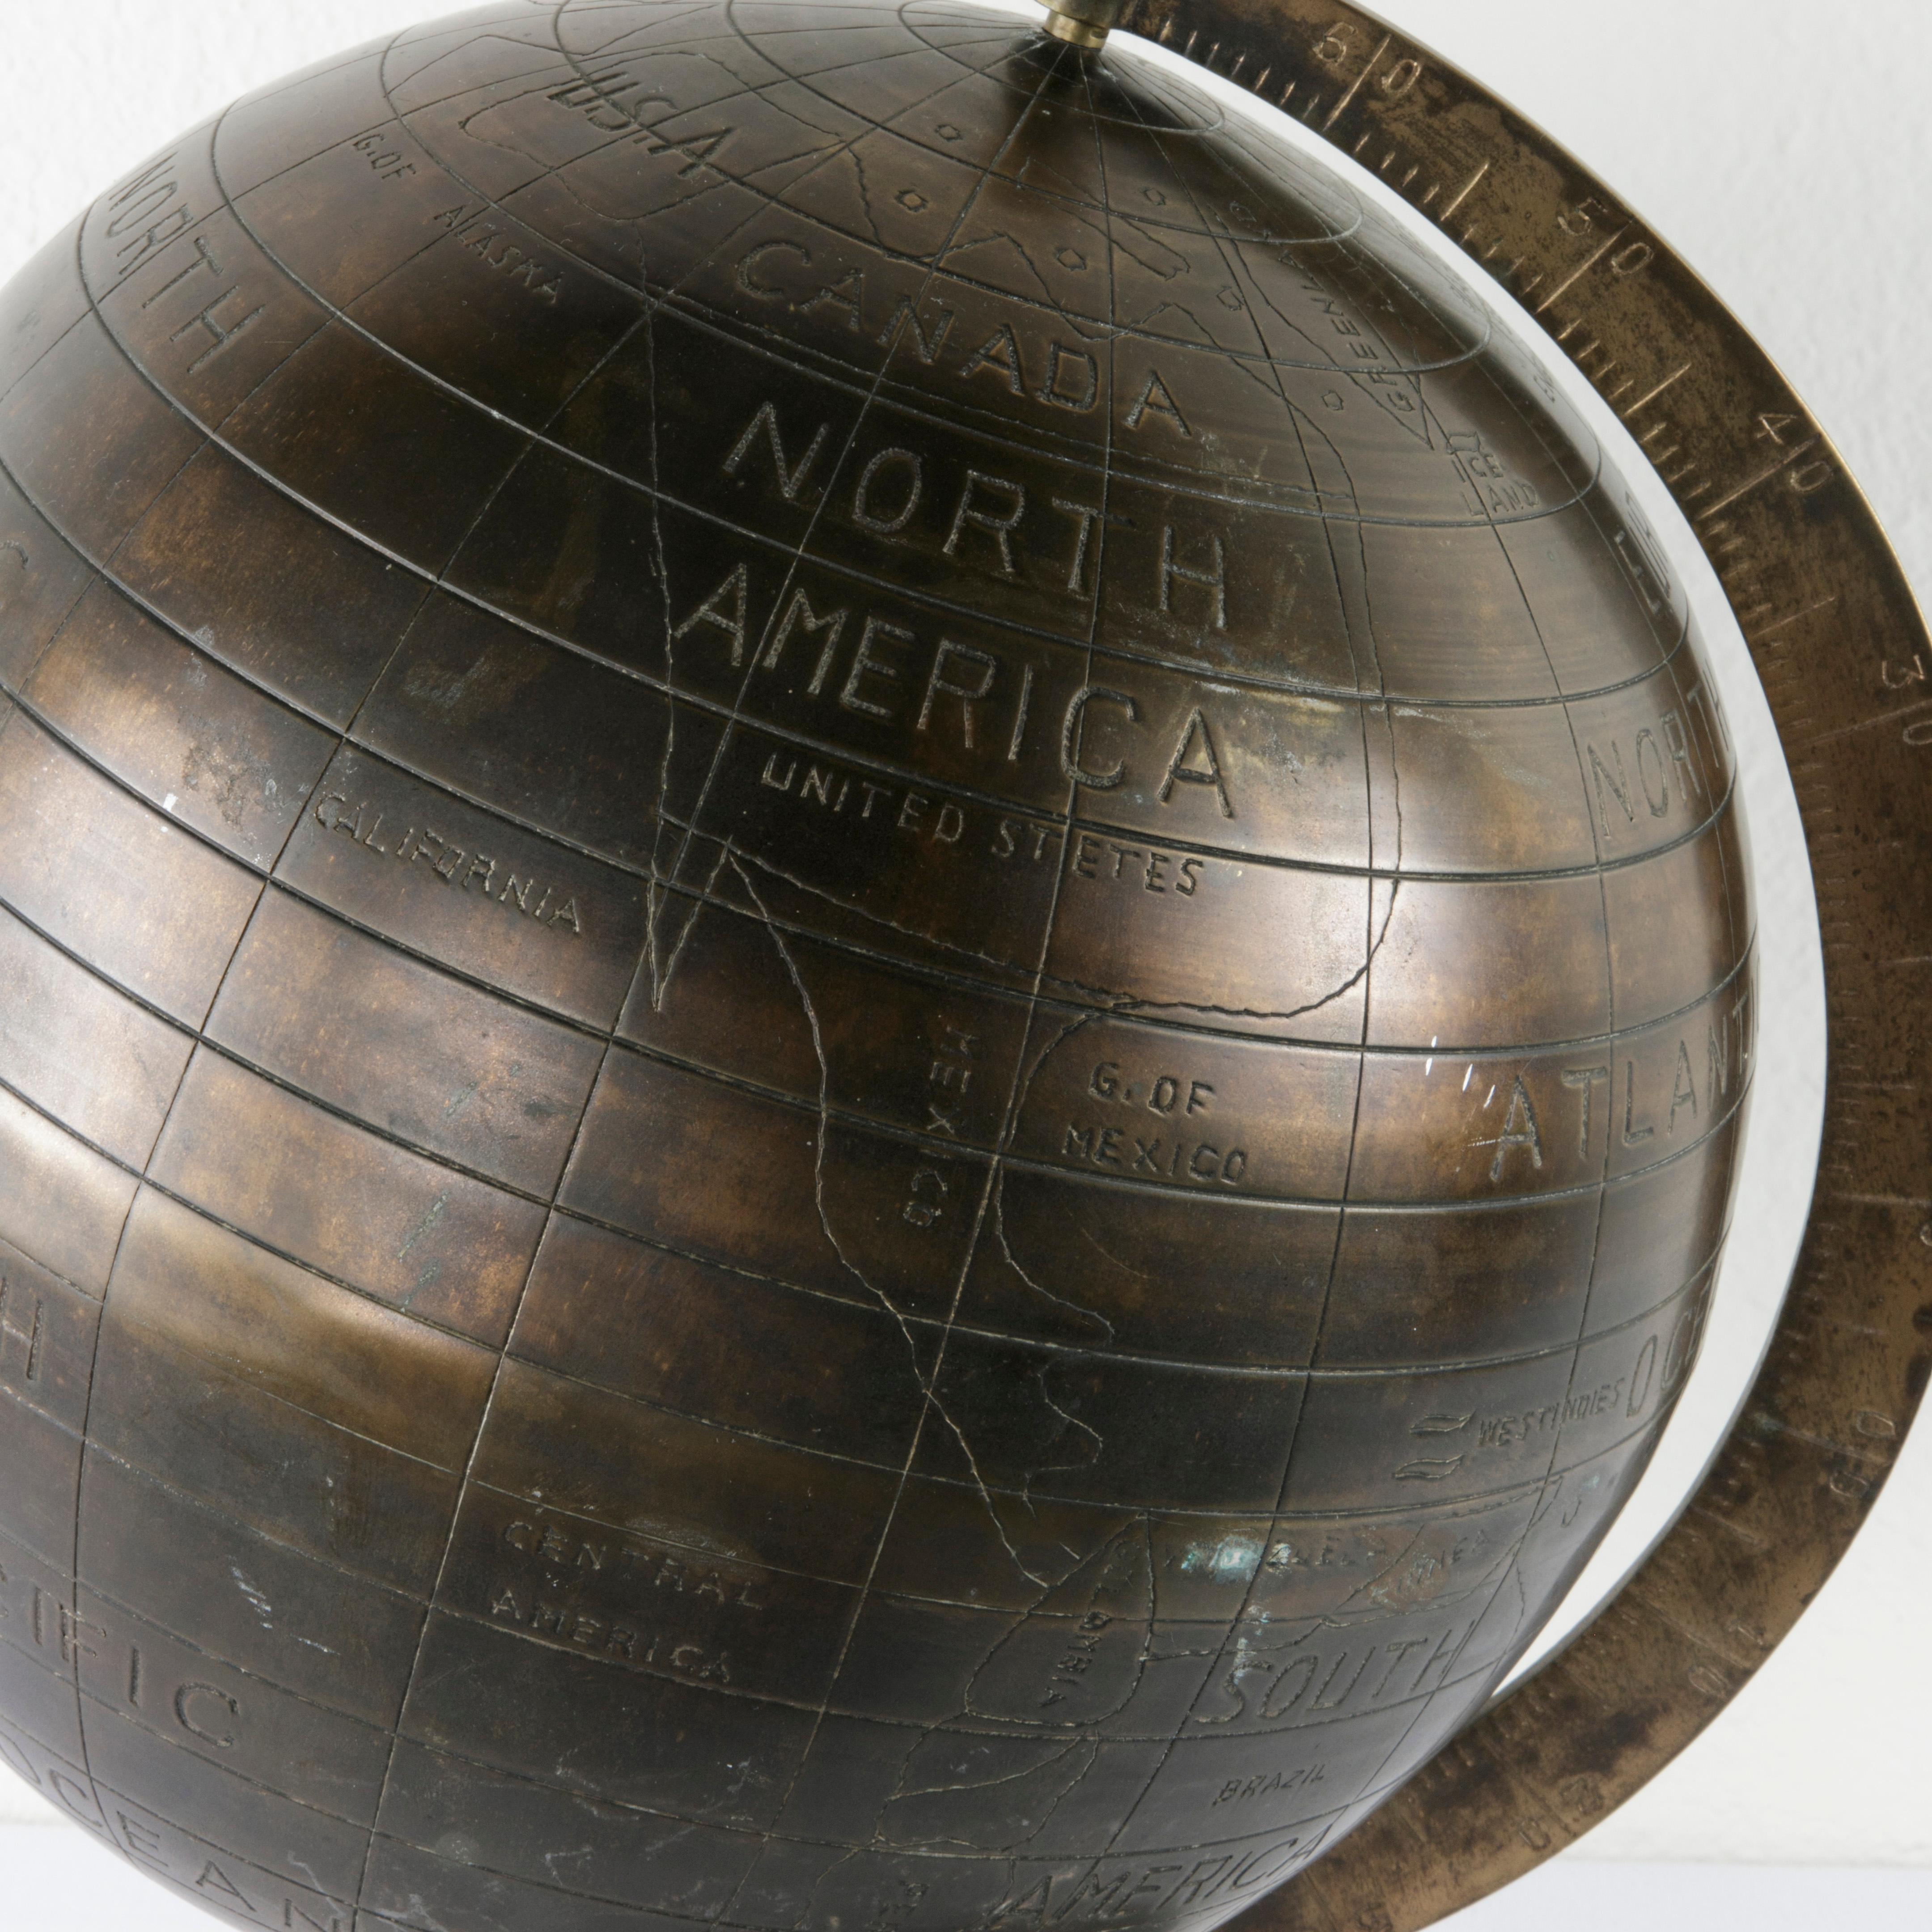 Late 20th Century 20th Century Stylized Etched Bronze Globe on Axis Labeled in English